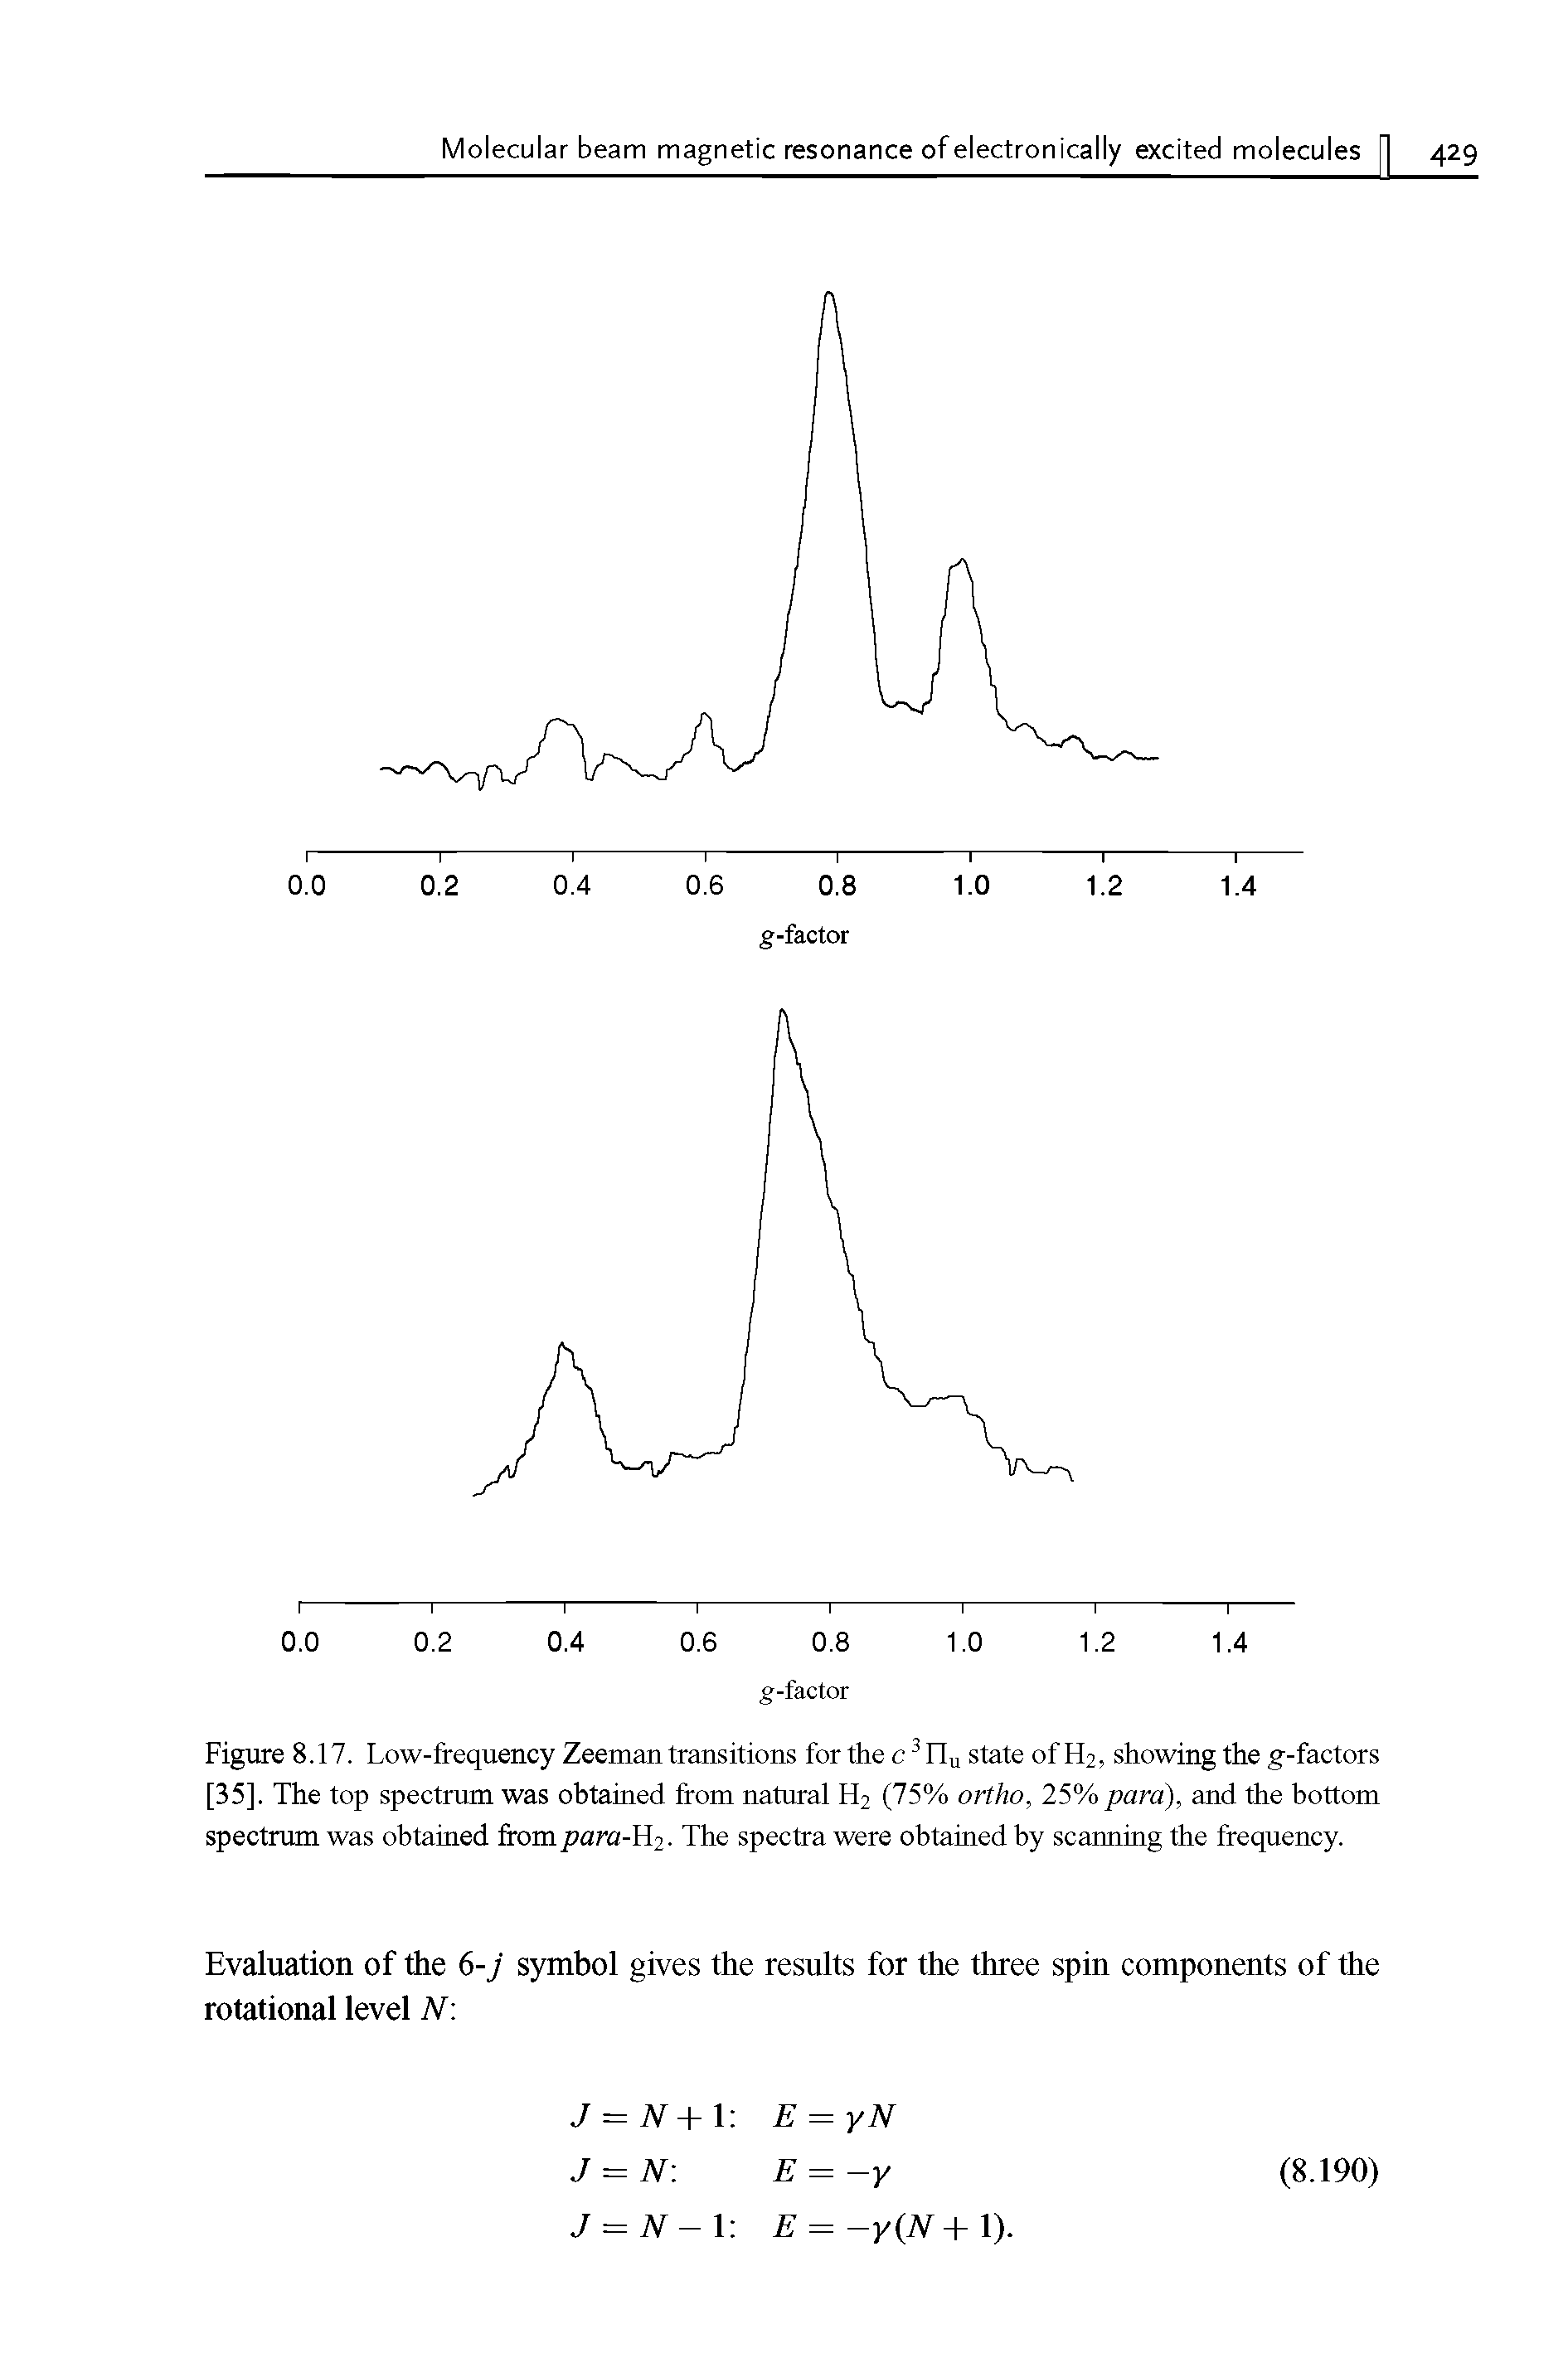 Figure 8.17. Low-frequency Zeeman transitions for the c 3nu state of EL, showing the g-factors [35], The top spectrum was obtained from natural H2 (75% ortho, 25% para), and the bottom spectrum was obtained from para-H2. The spectra were obtained by scanning the frequency.